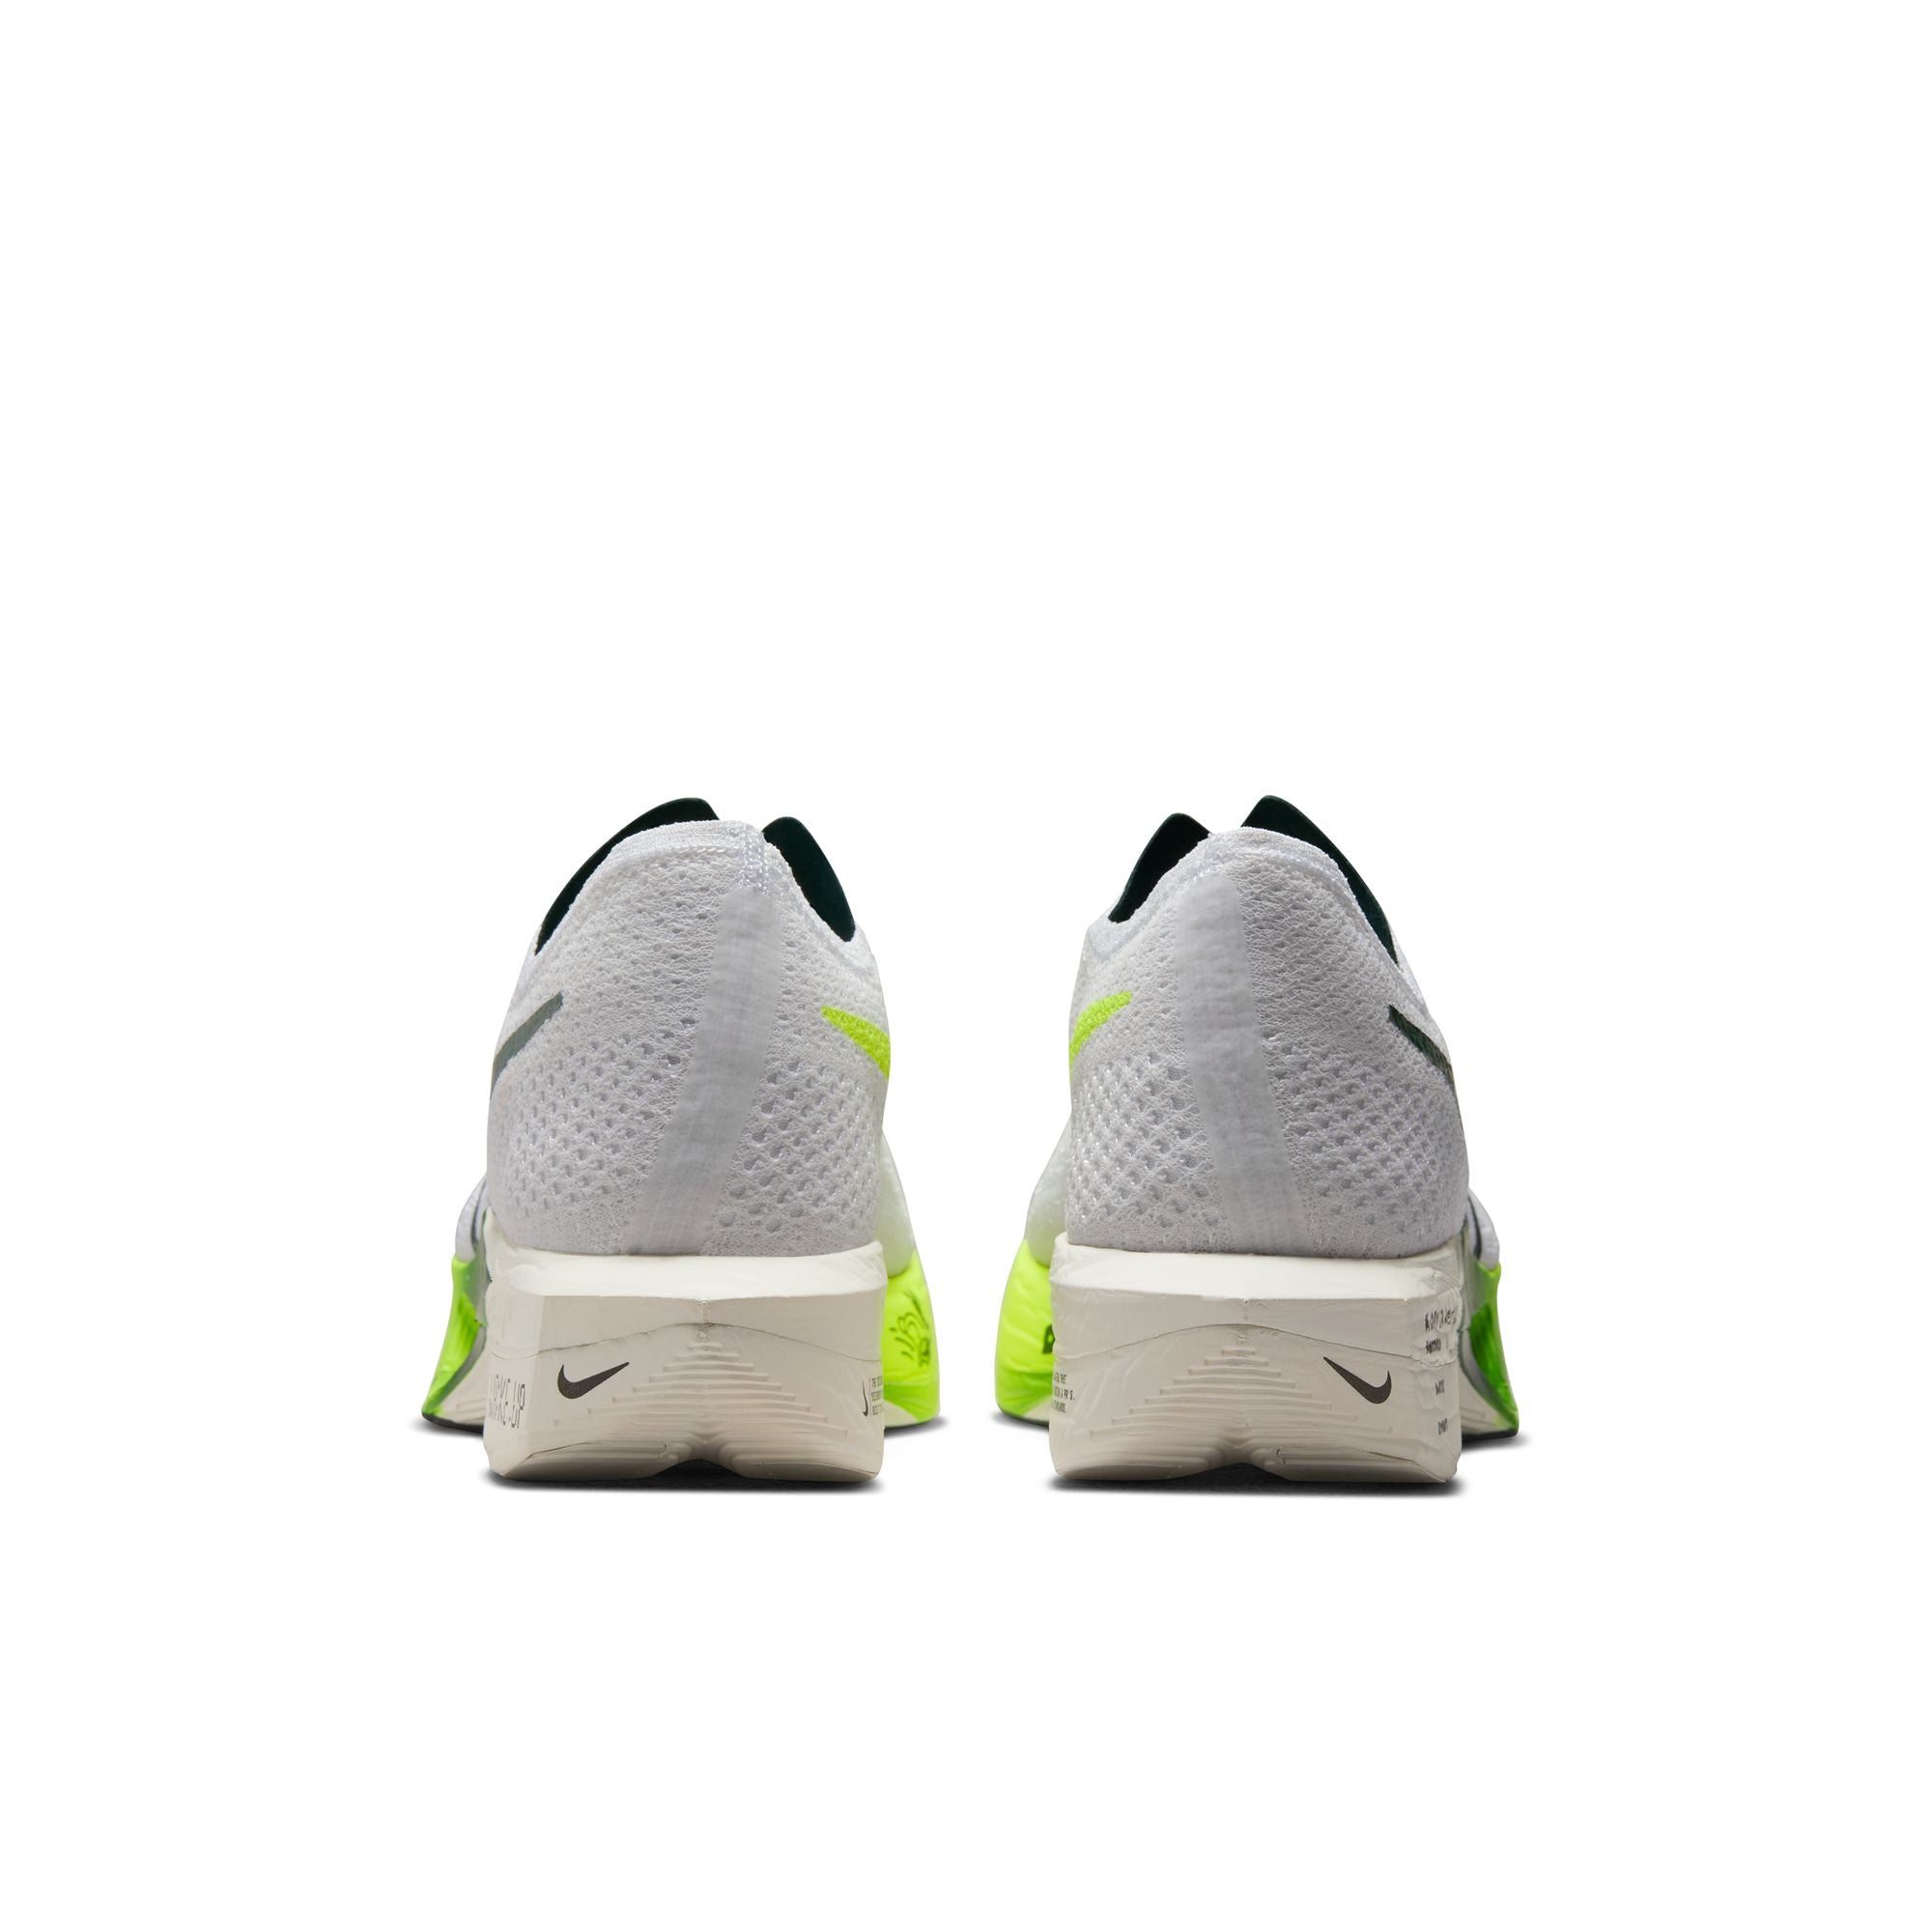 back view of mens vaporfly 3